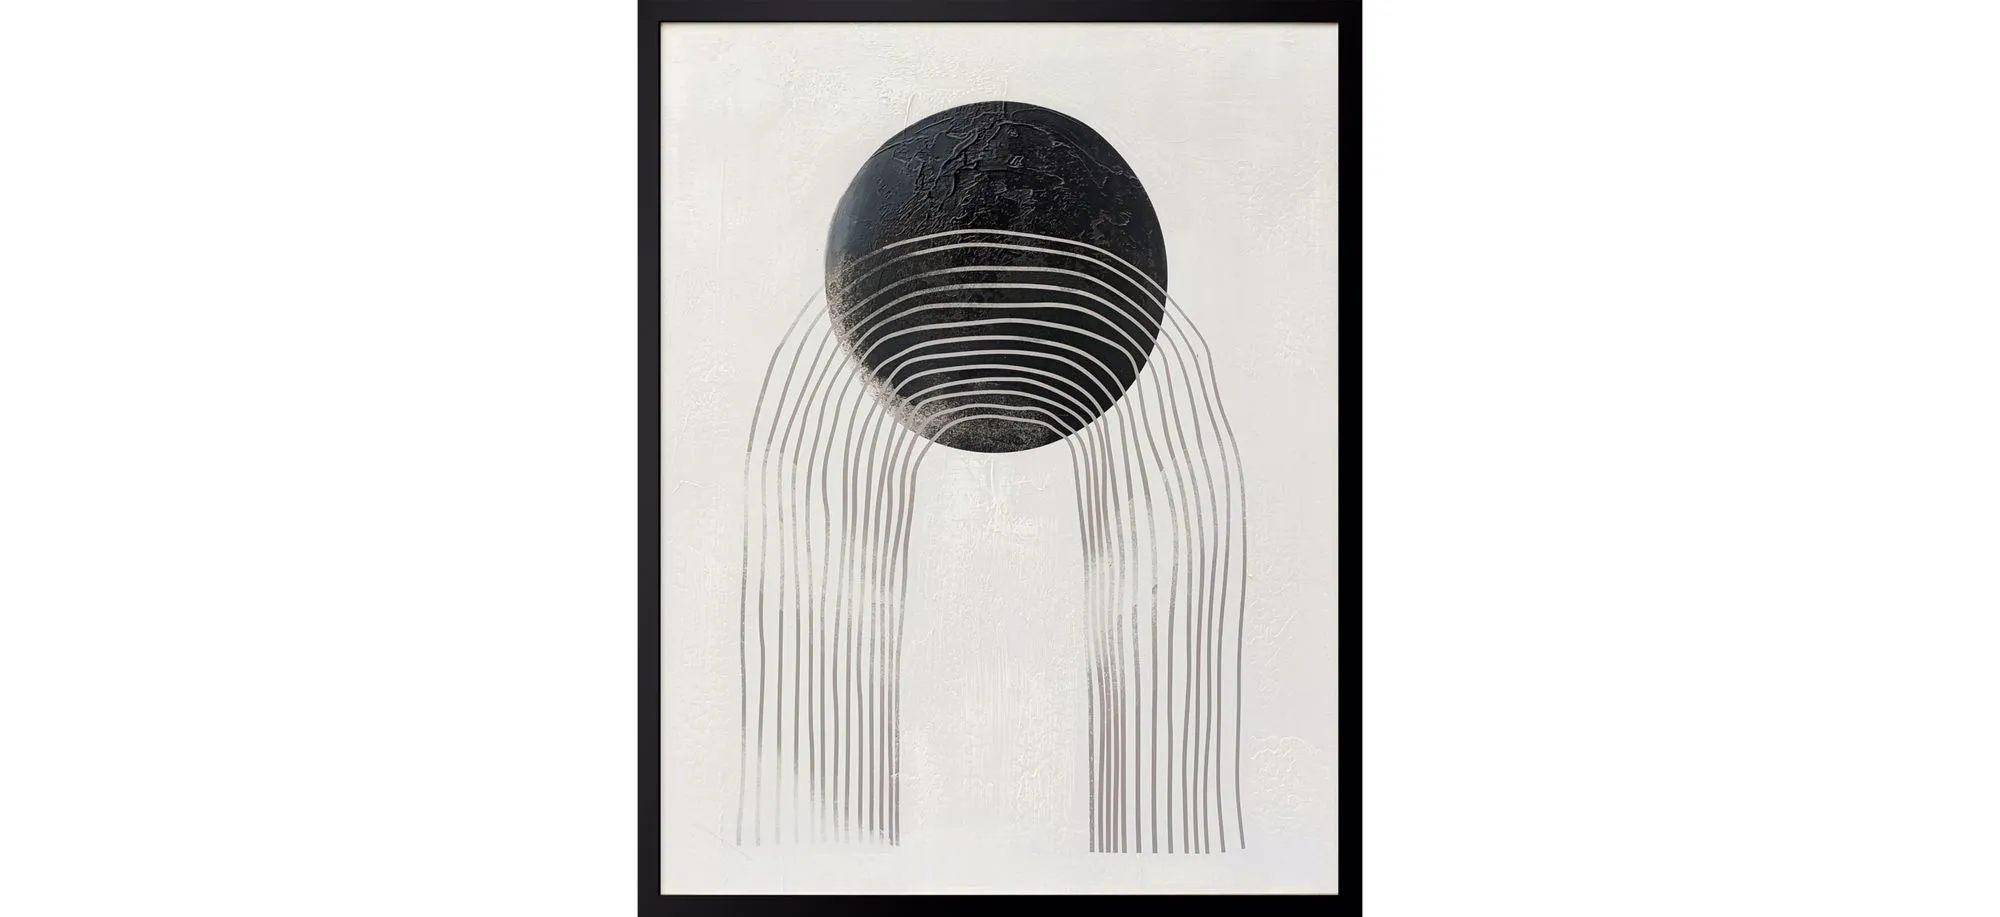 Phases II Wall Art in Black/White by Bassett Mirror Co.